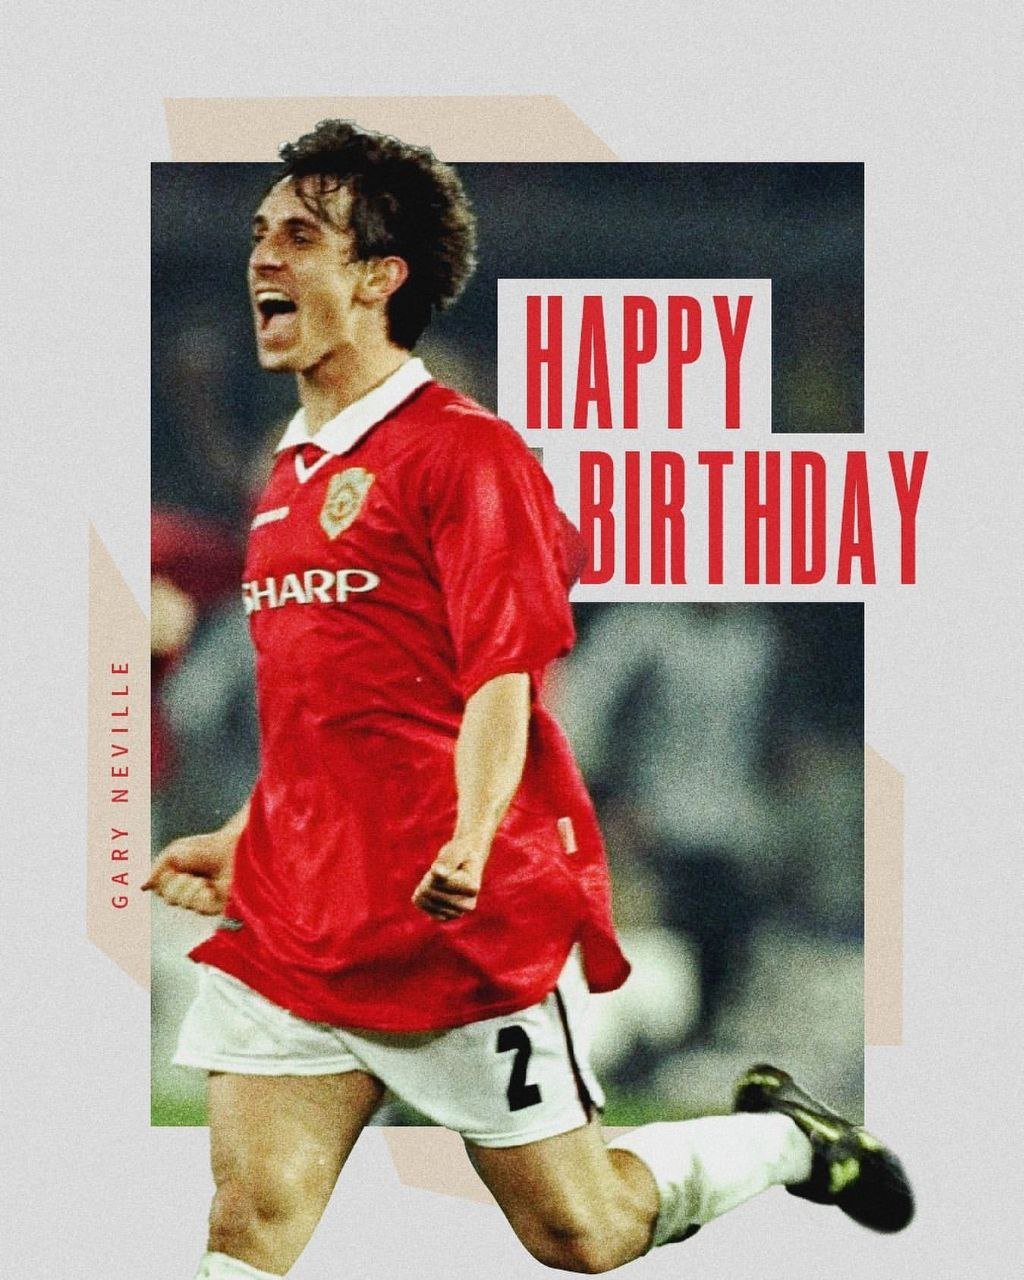 Happy birthday to our former defender, Gary Neville 2! 